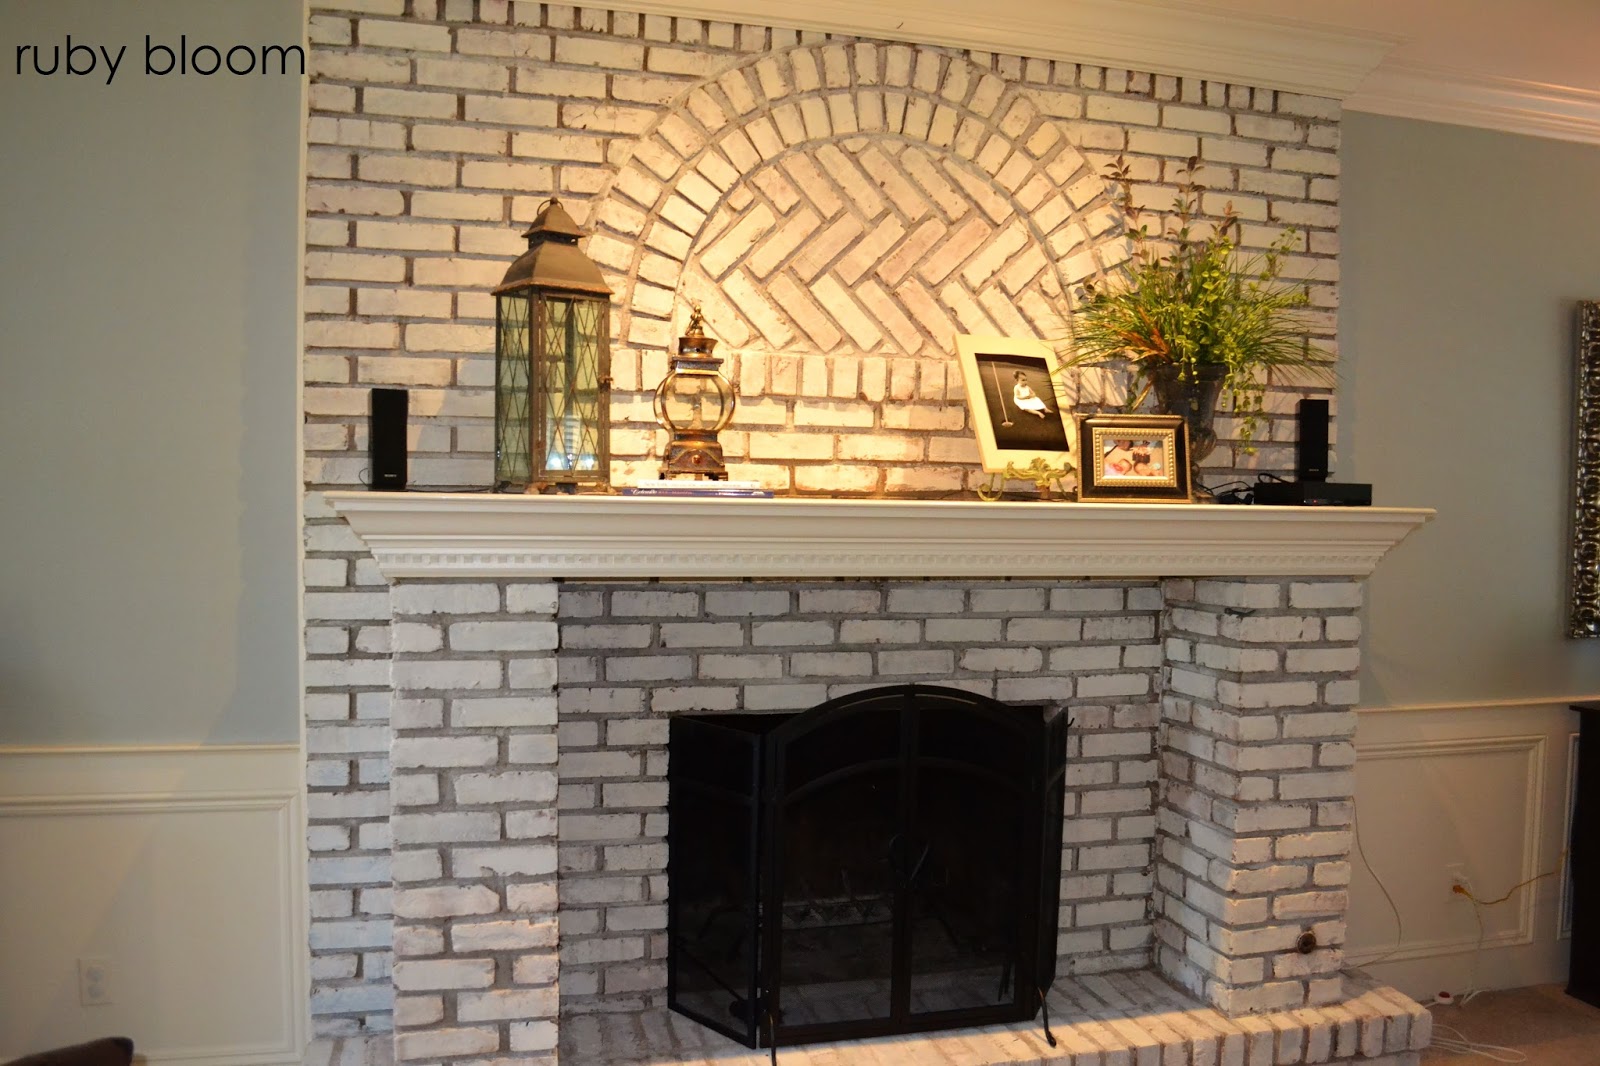 ruby bloom: Painted brick fireplace